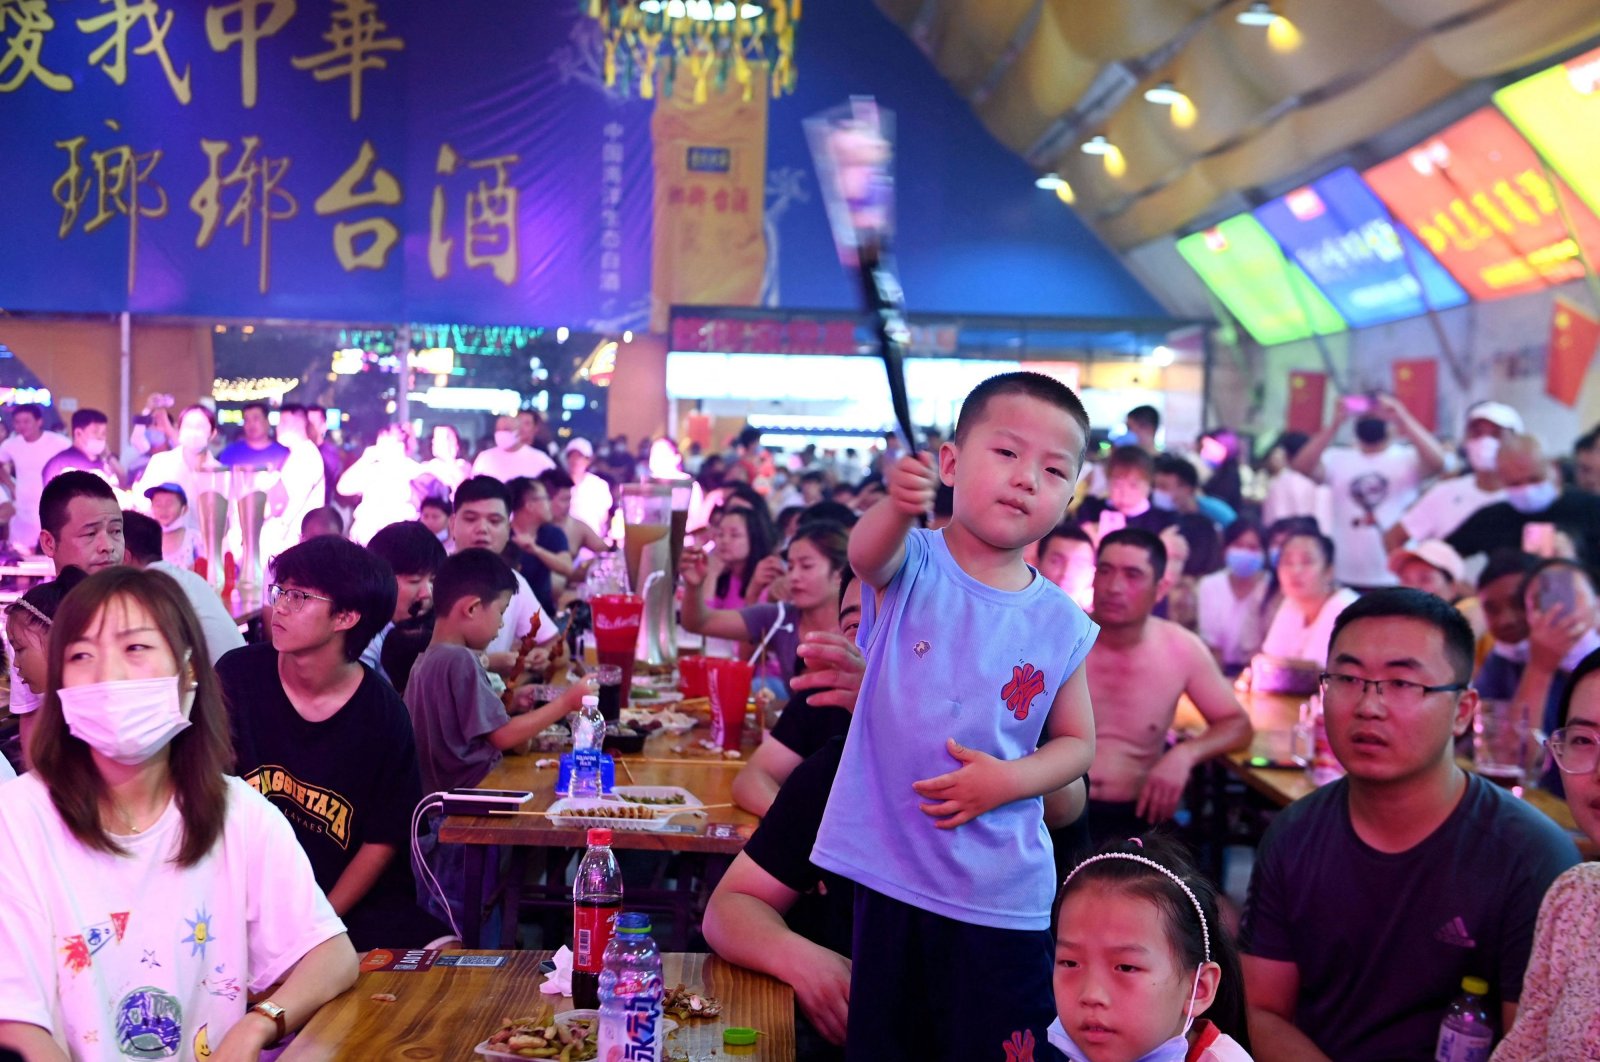 People enjoy drinks and food during the annual Qingdao Beer Festival in Qingdao, Shandong province, China, July 22, 2022. (AFP Photo)